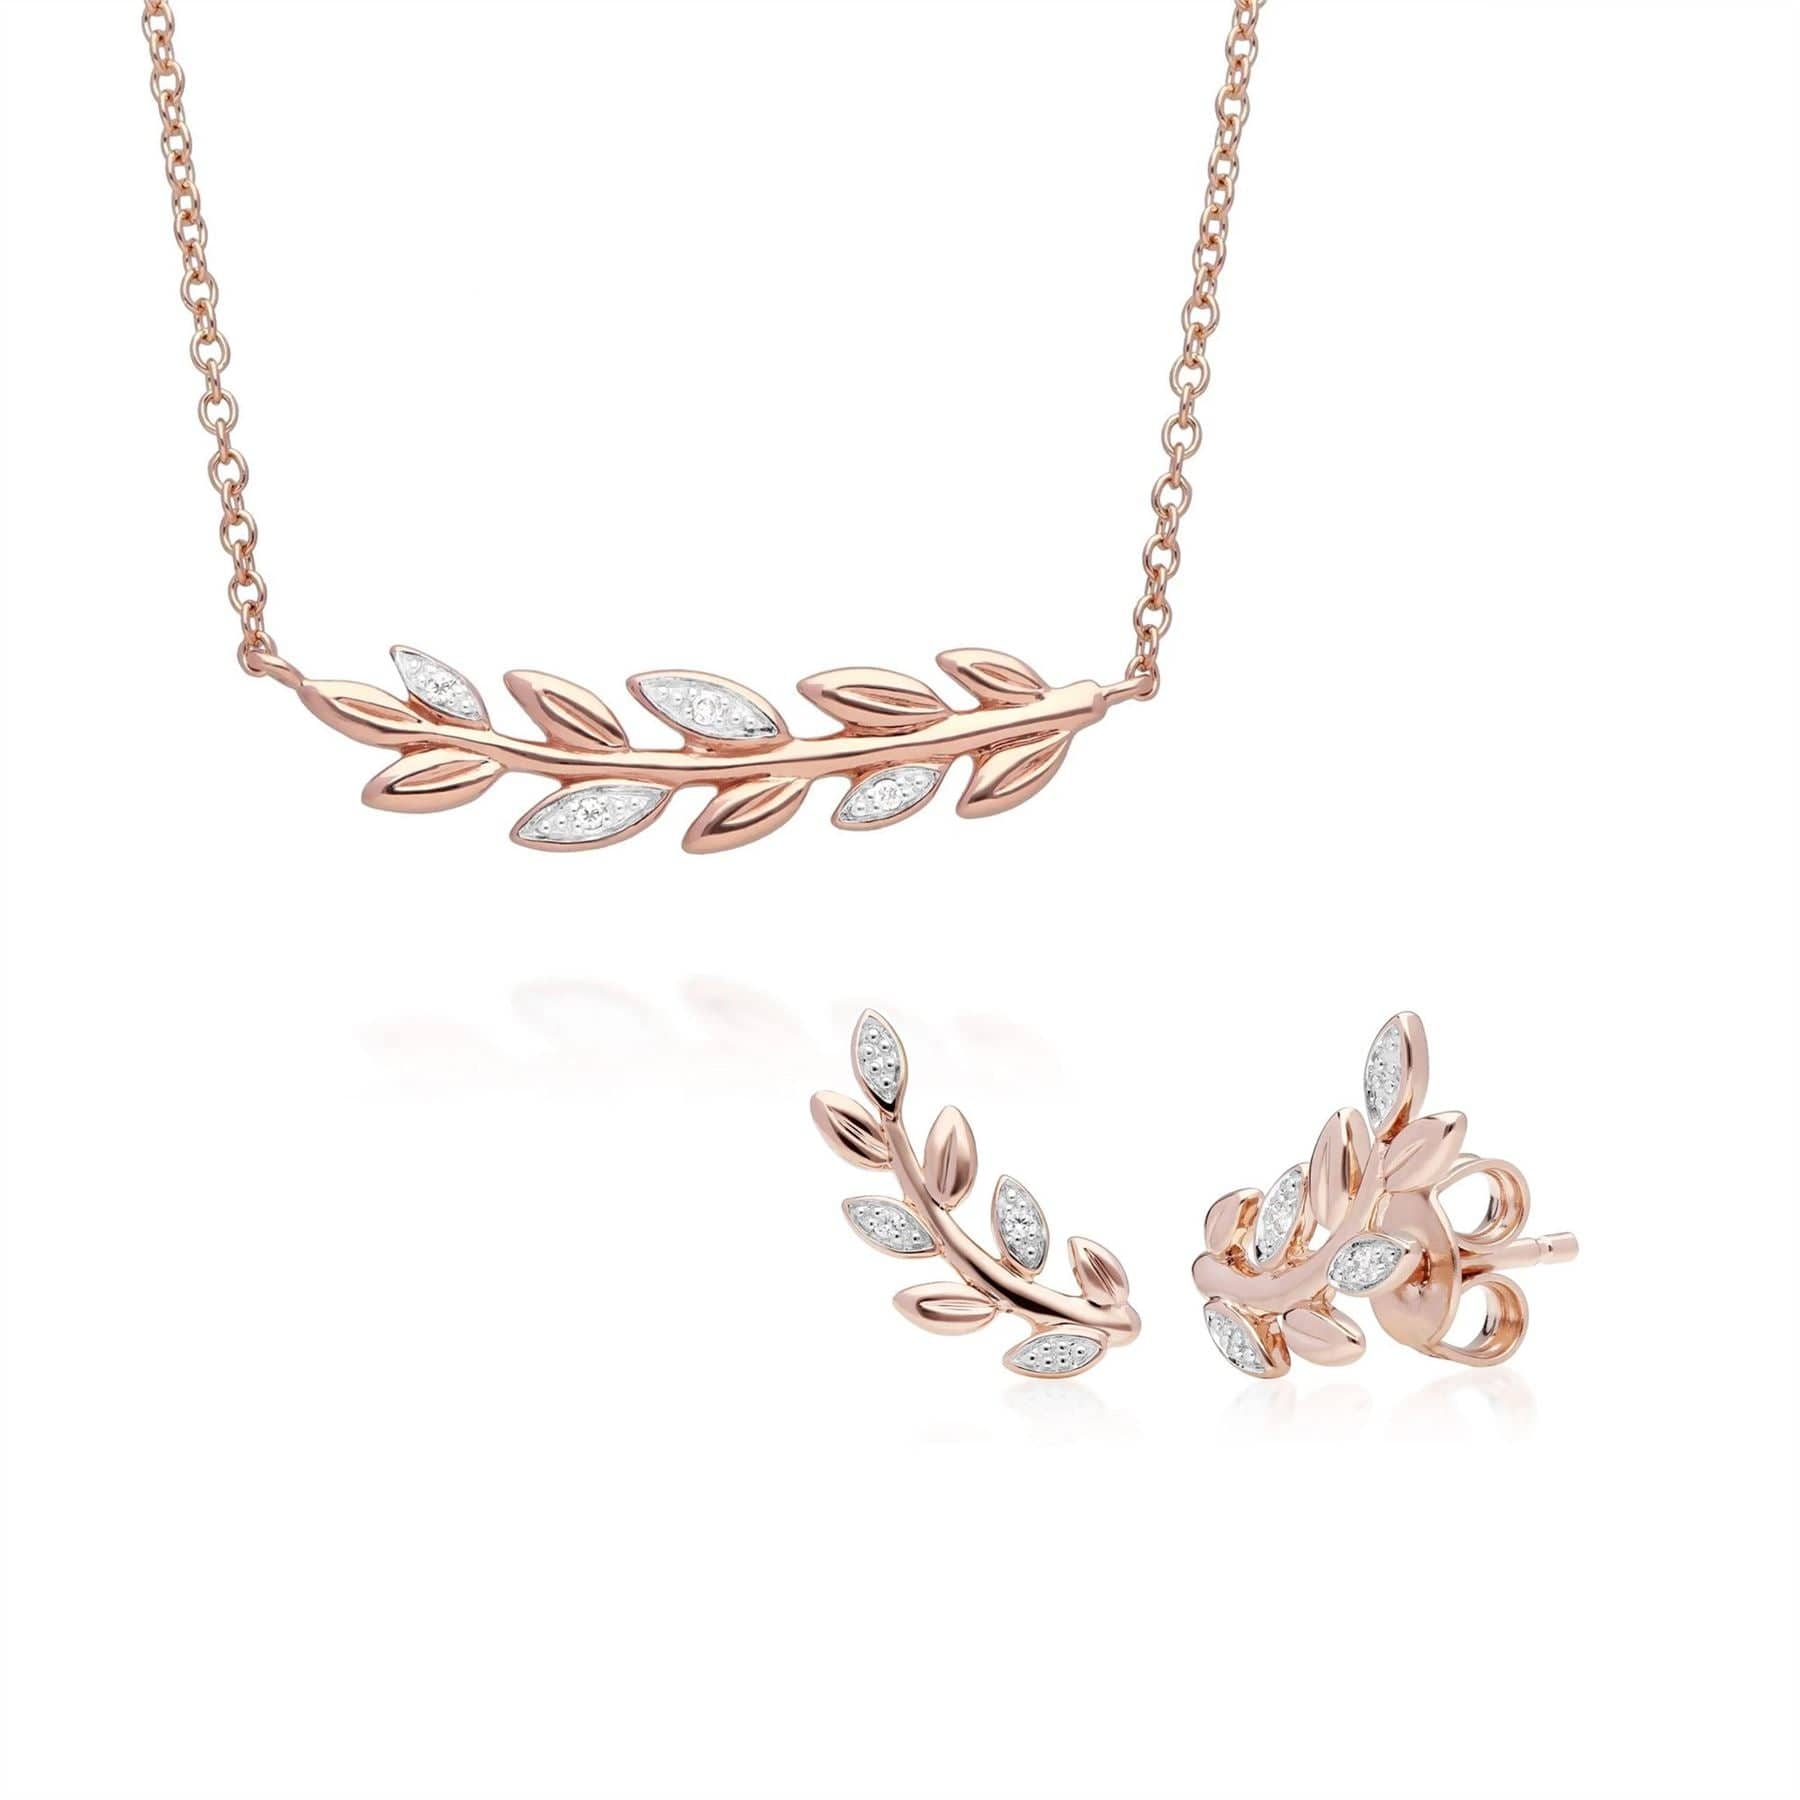 191N0231019-191E0390029 O Leaf Diamond Necklace & Stud Stud Earring Set in 9ct Rose Gold 1